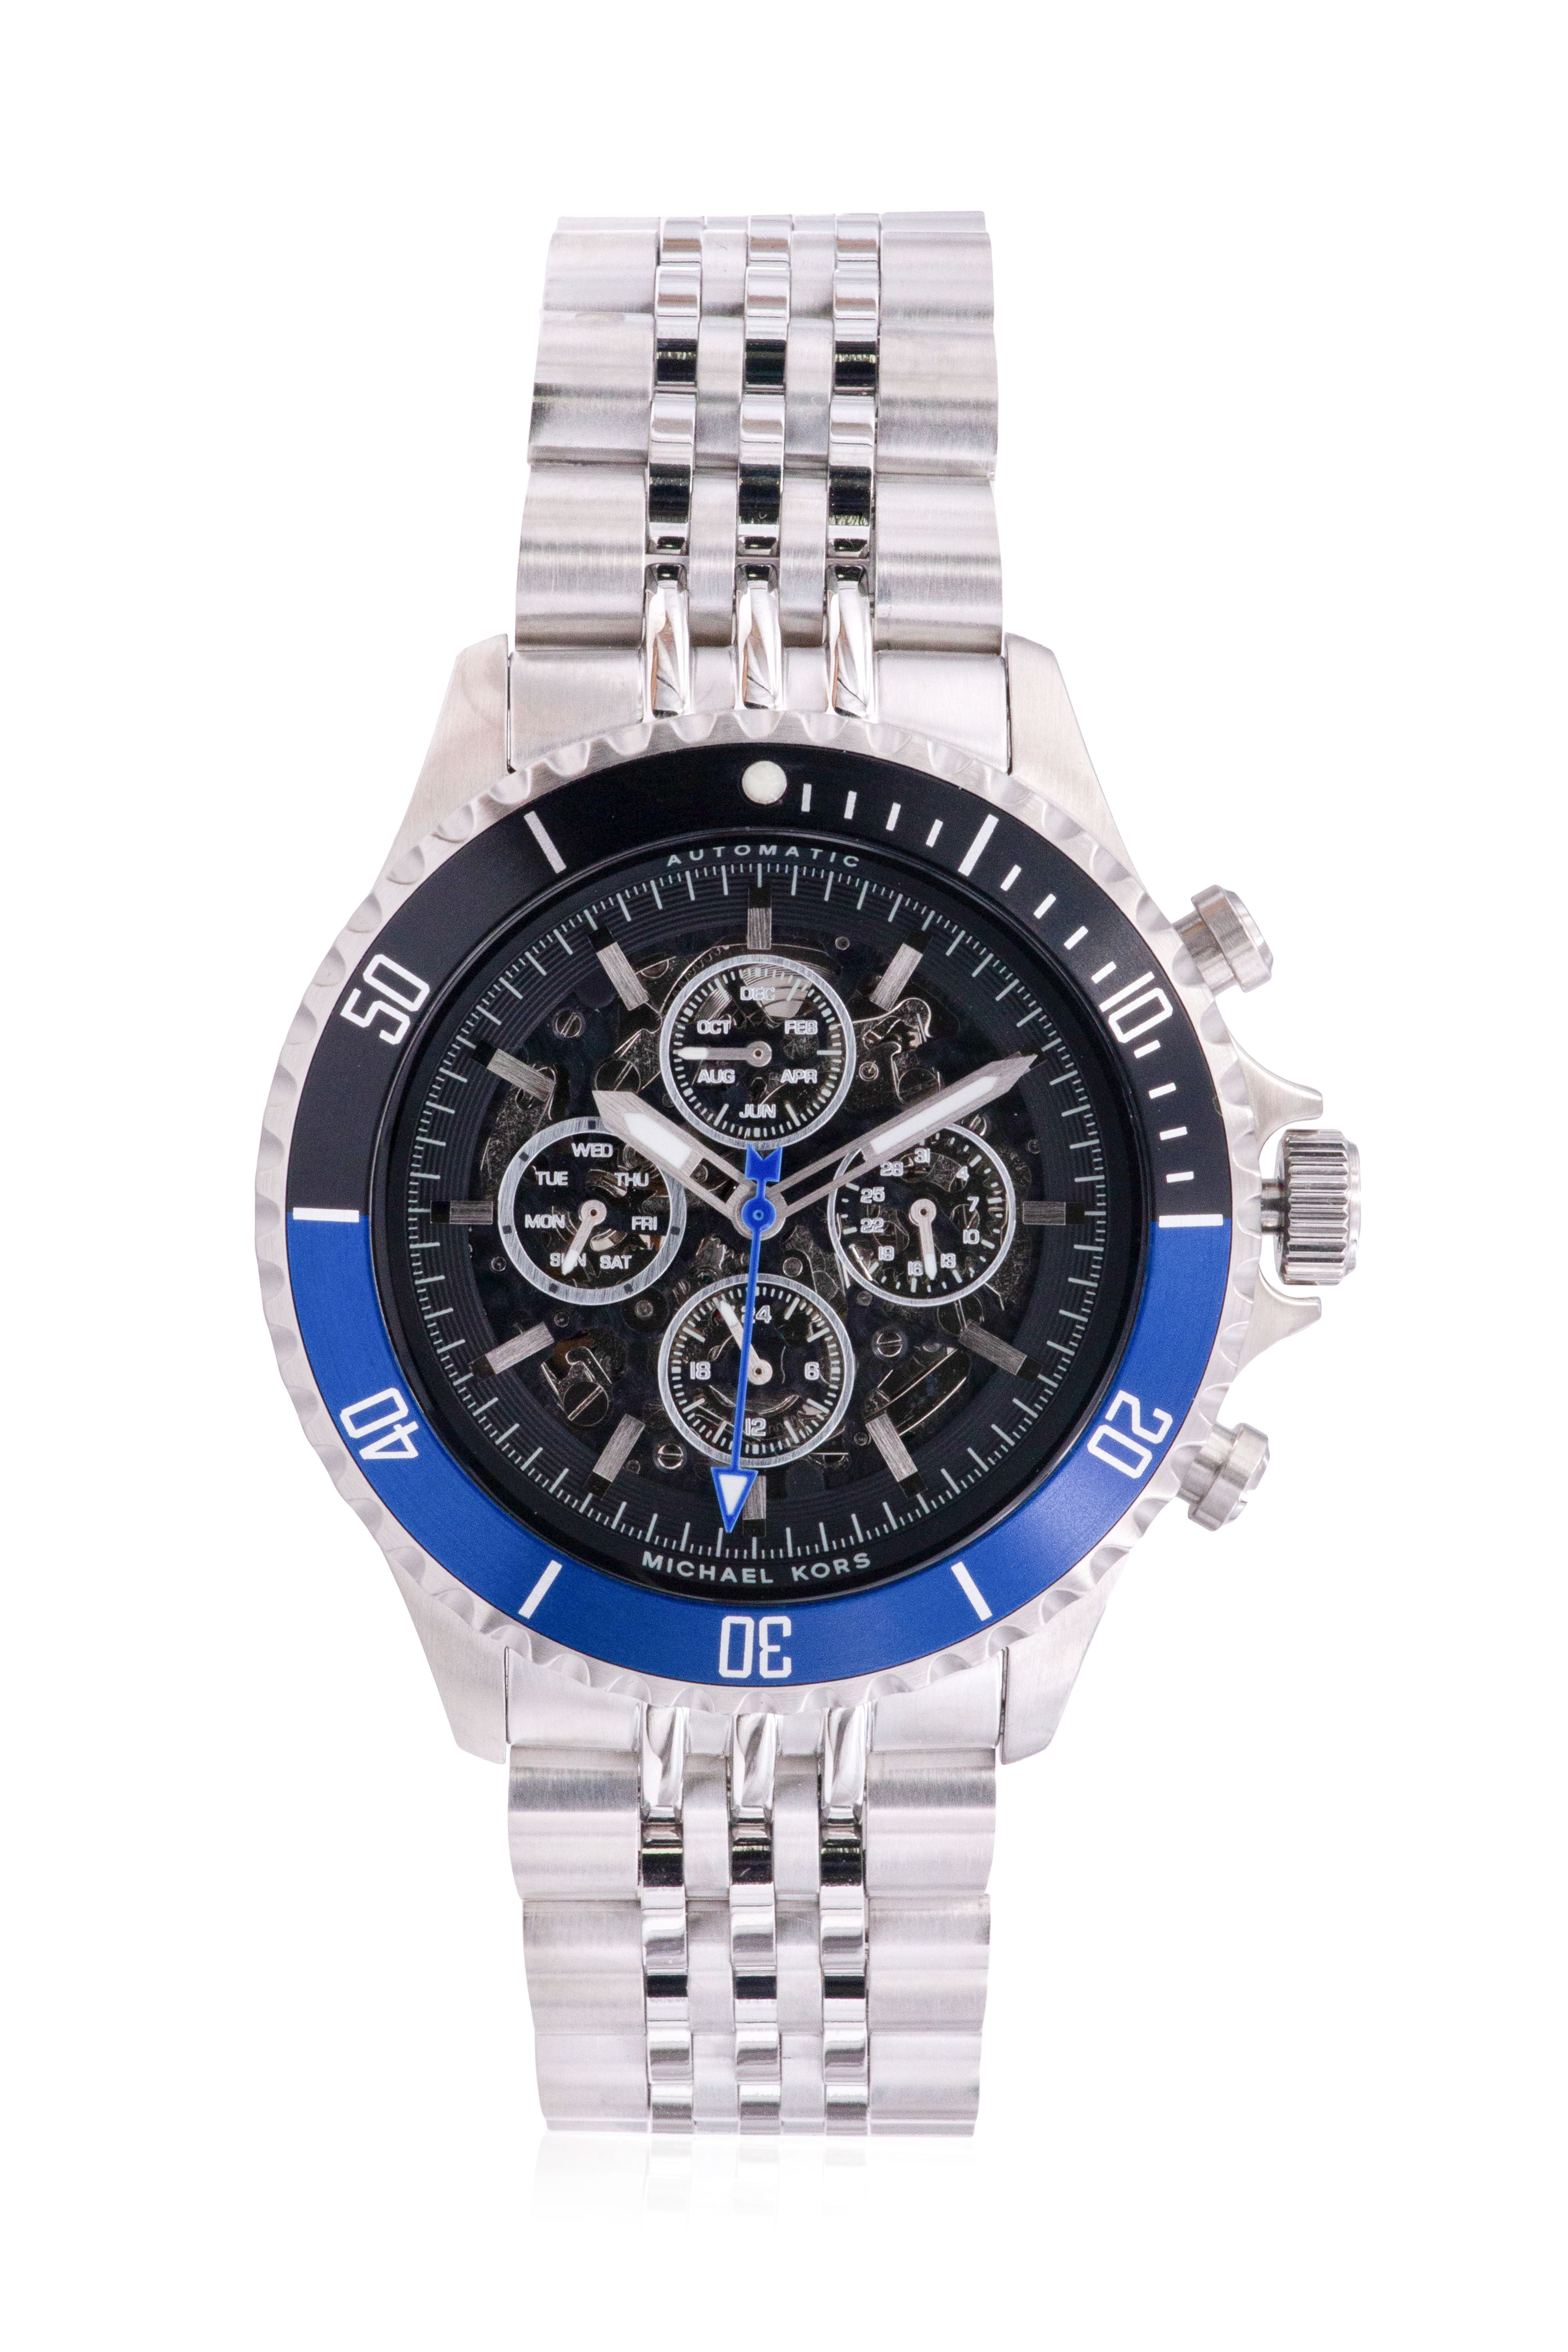 Michael Kors Bayville Automatic Chronograph Stainless Steel Mens Watch MK9045